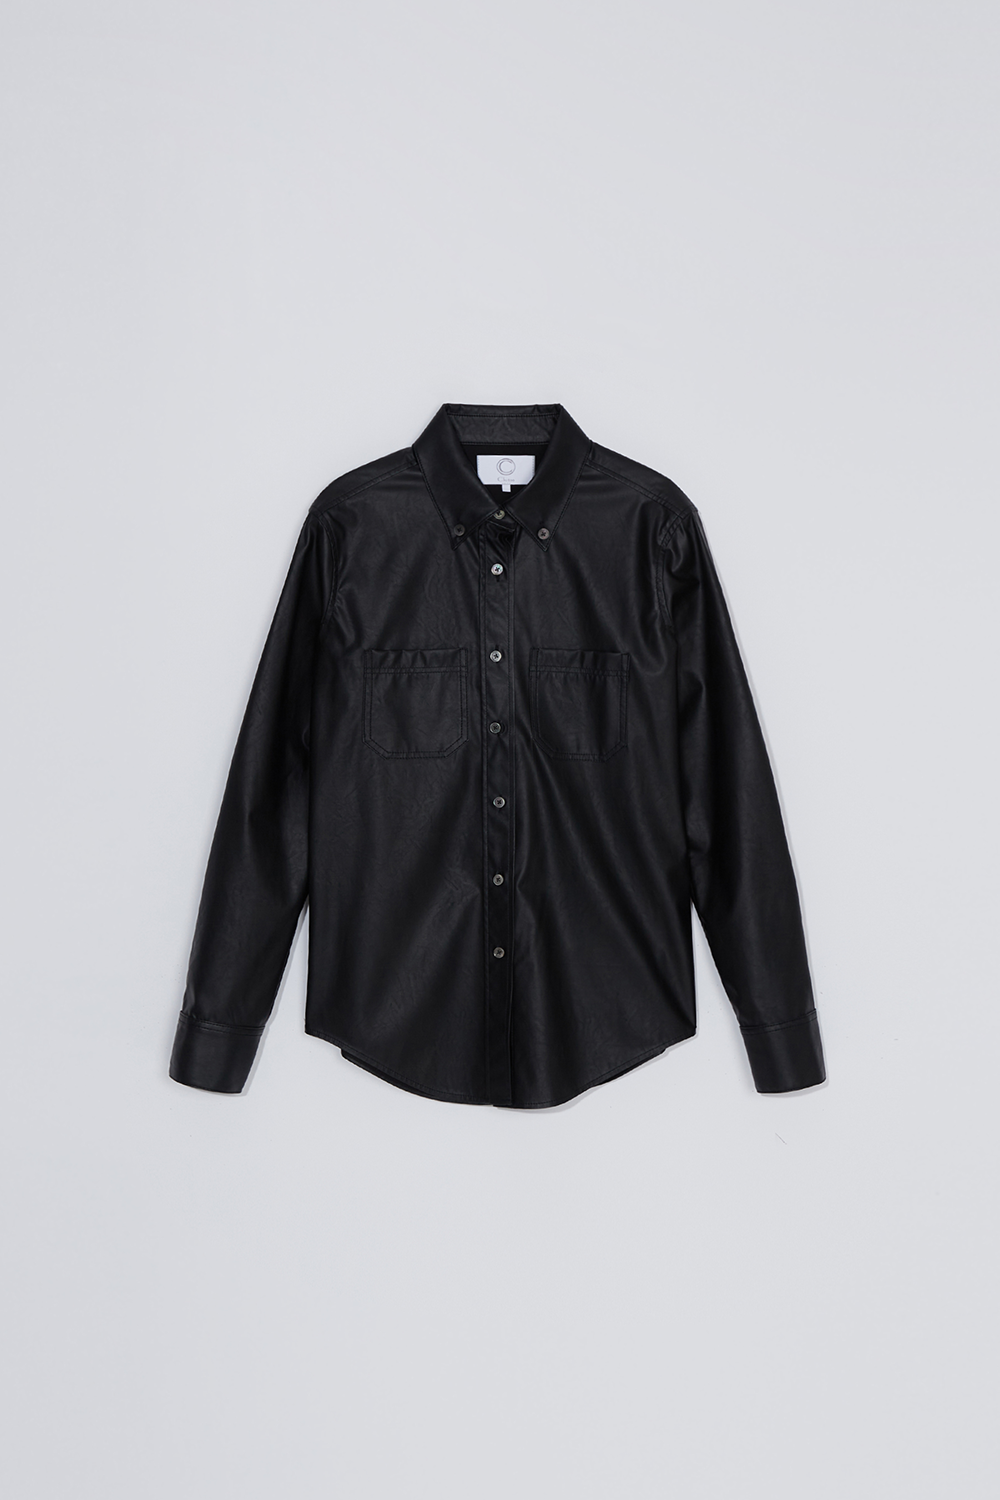 Tailored shirt(leather)_black